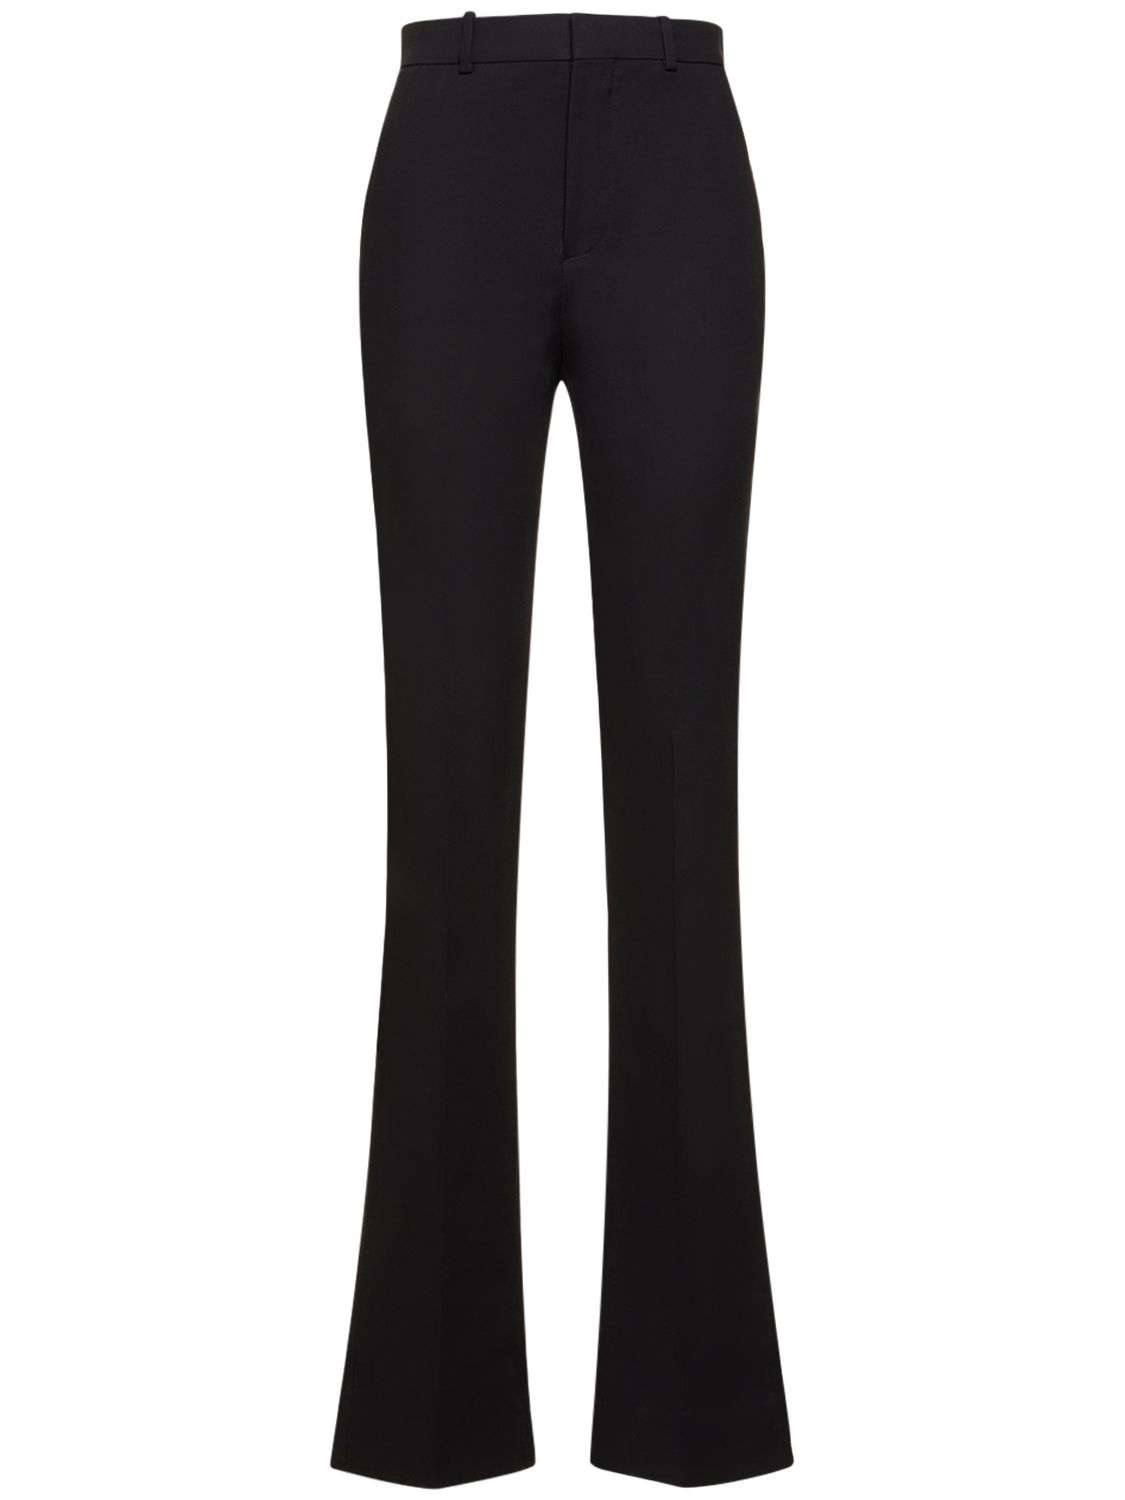 Laurence Fitted Stretch Cotton Pants - ANN DEMEULEMEESTER - Modalova